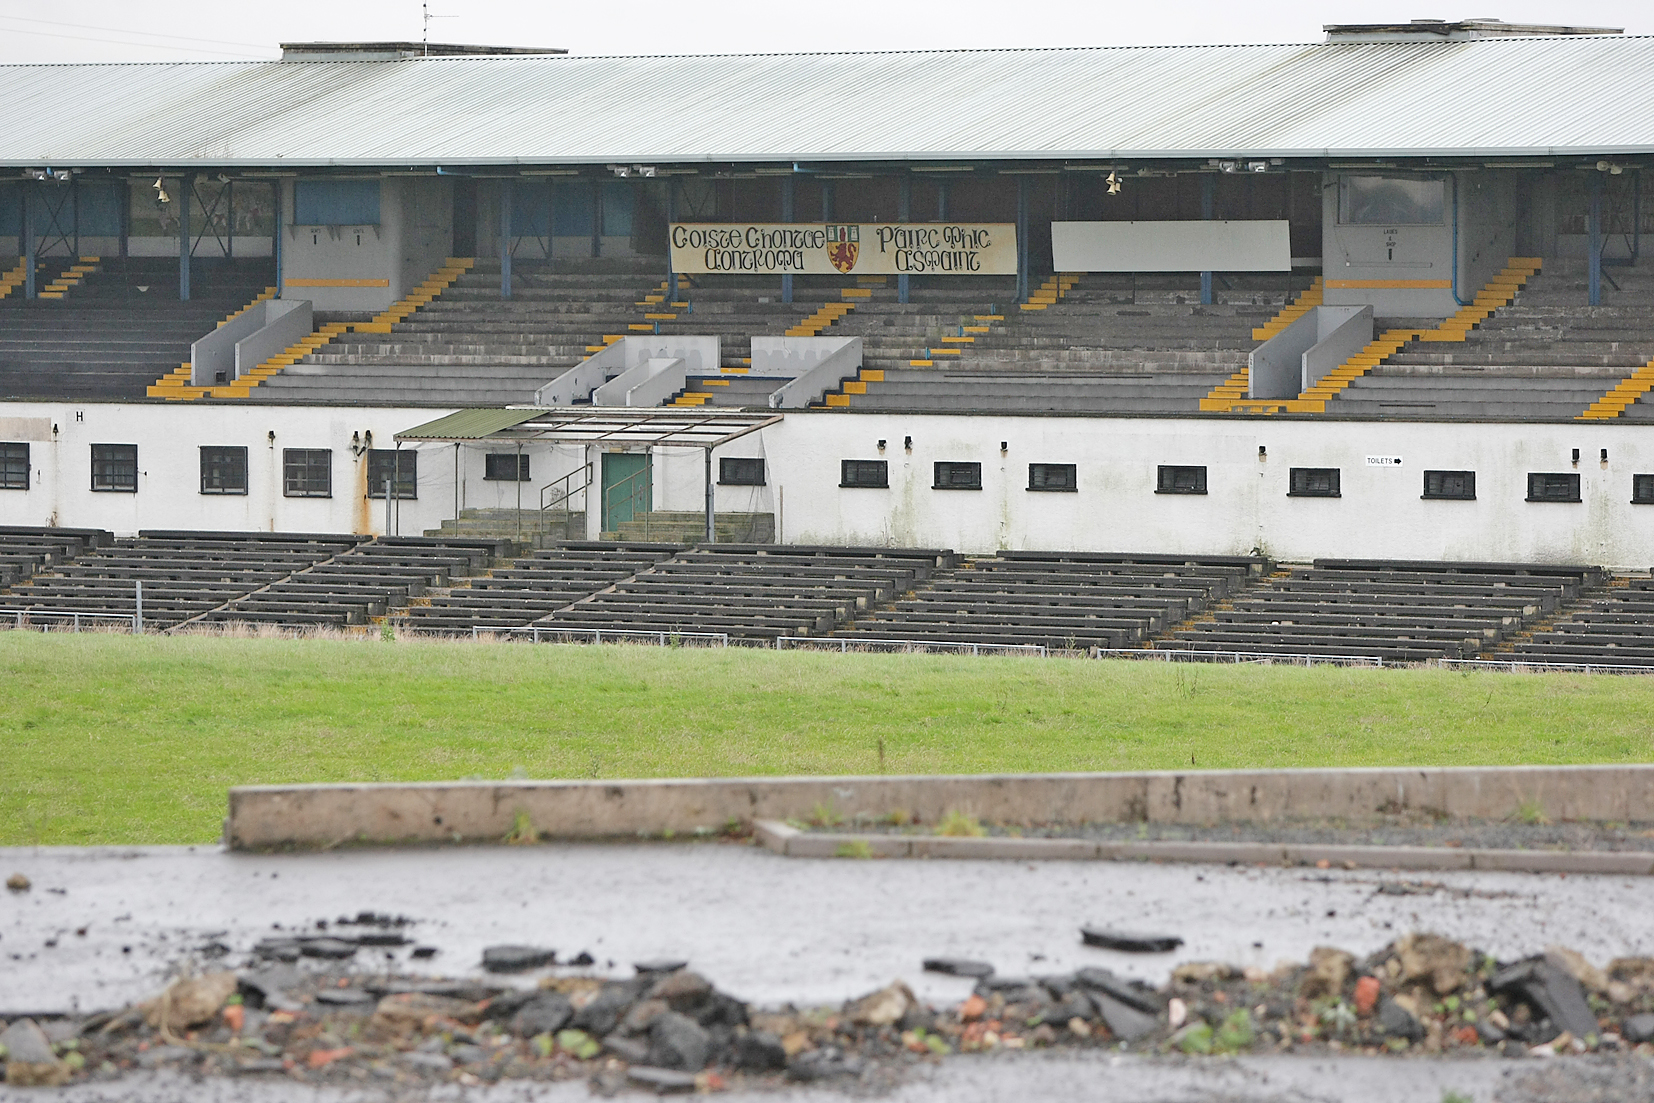 The redevelopment of Casement Park has stalled amidst wrangling over planning issues